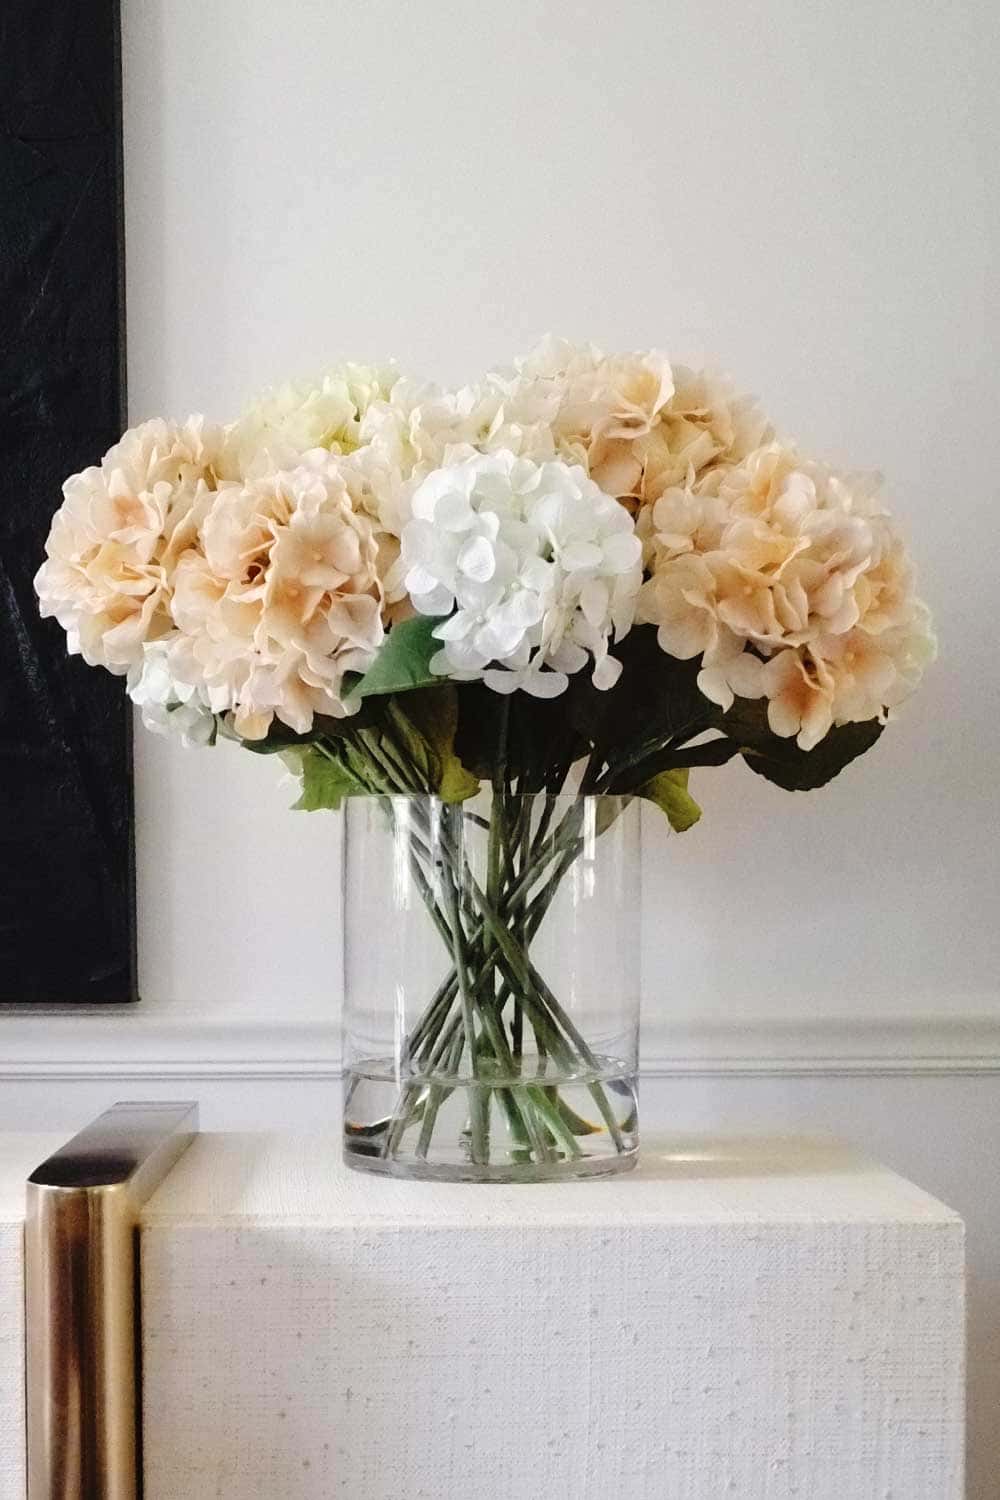 Create this DIY Artificial Flower Arrangement in glass vase using resin that looks like water - large bunch of hydrangeas